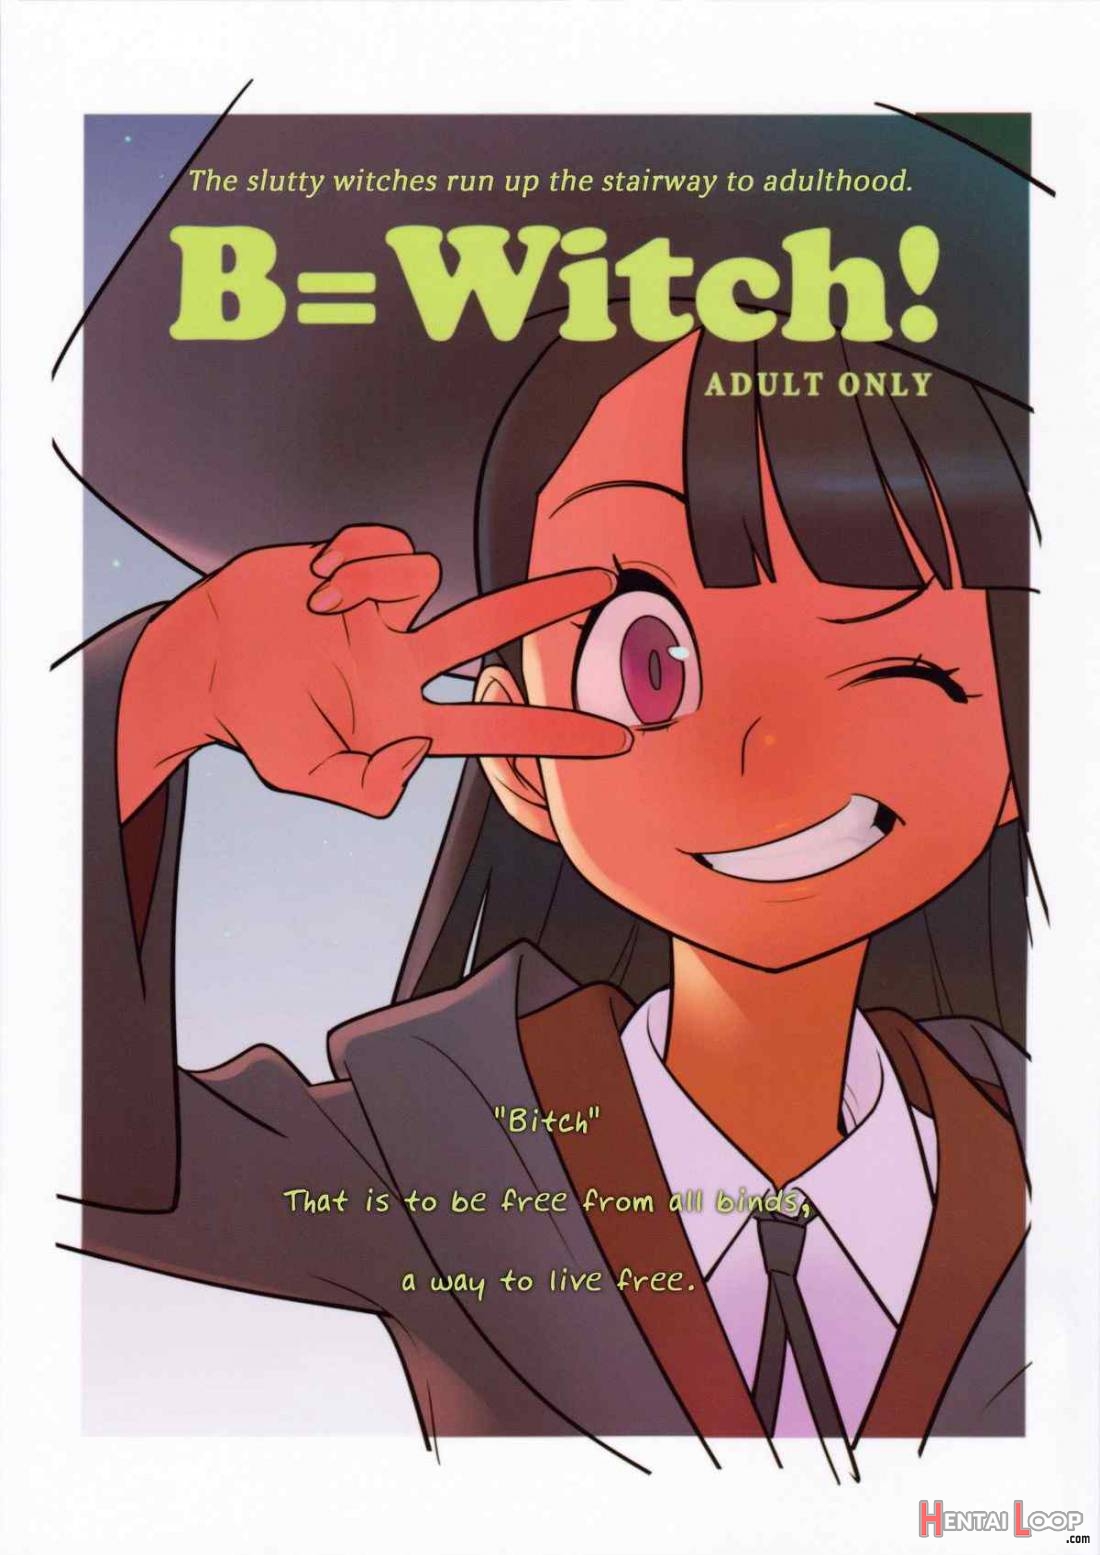 B=witch! page 1